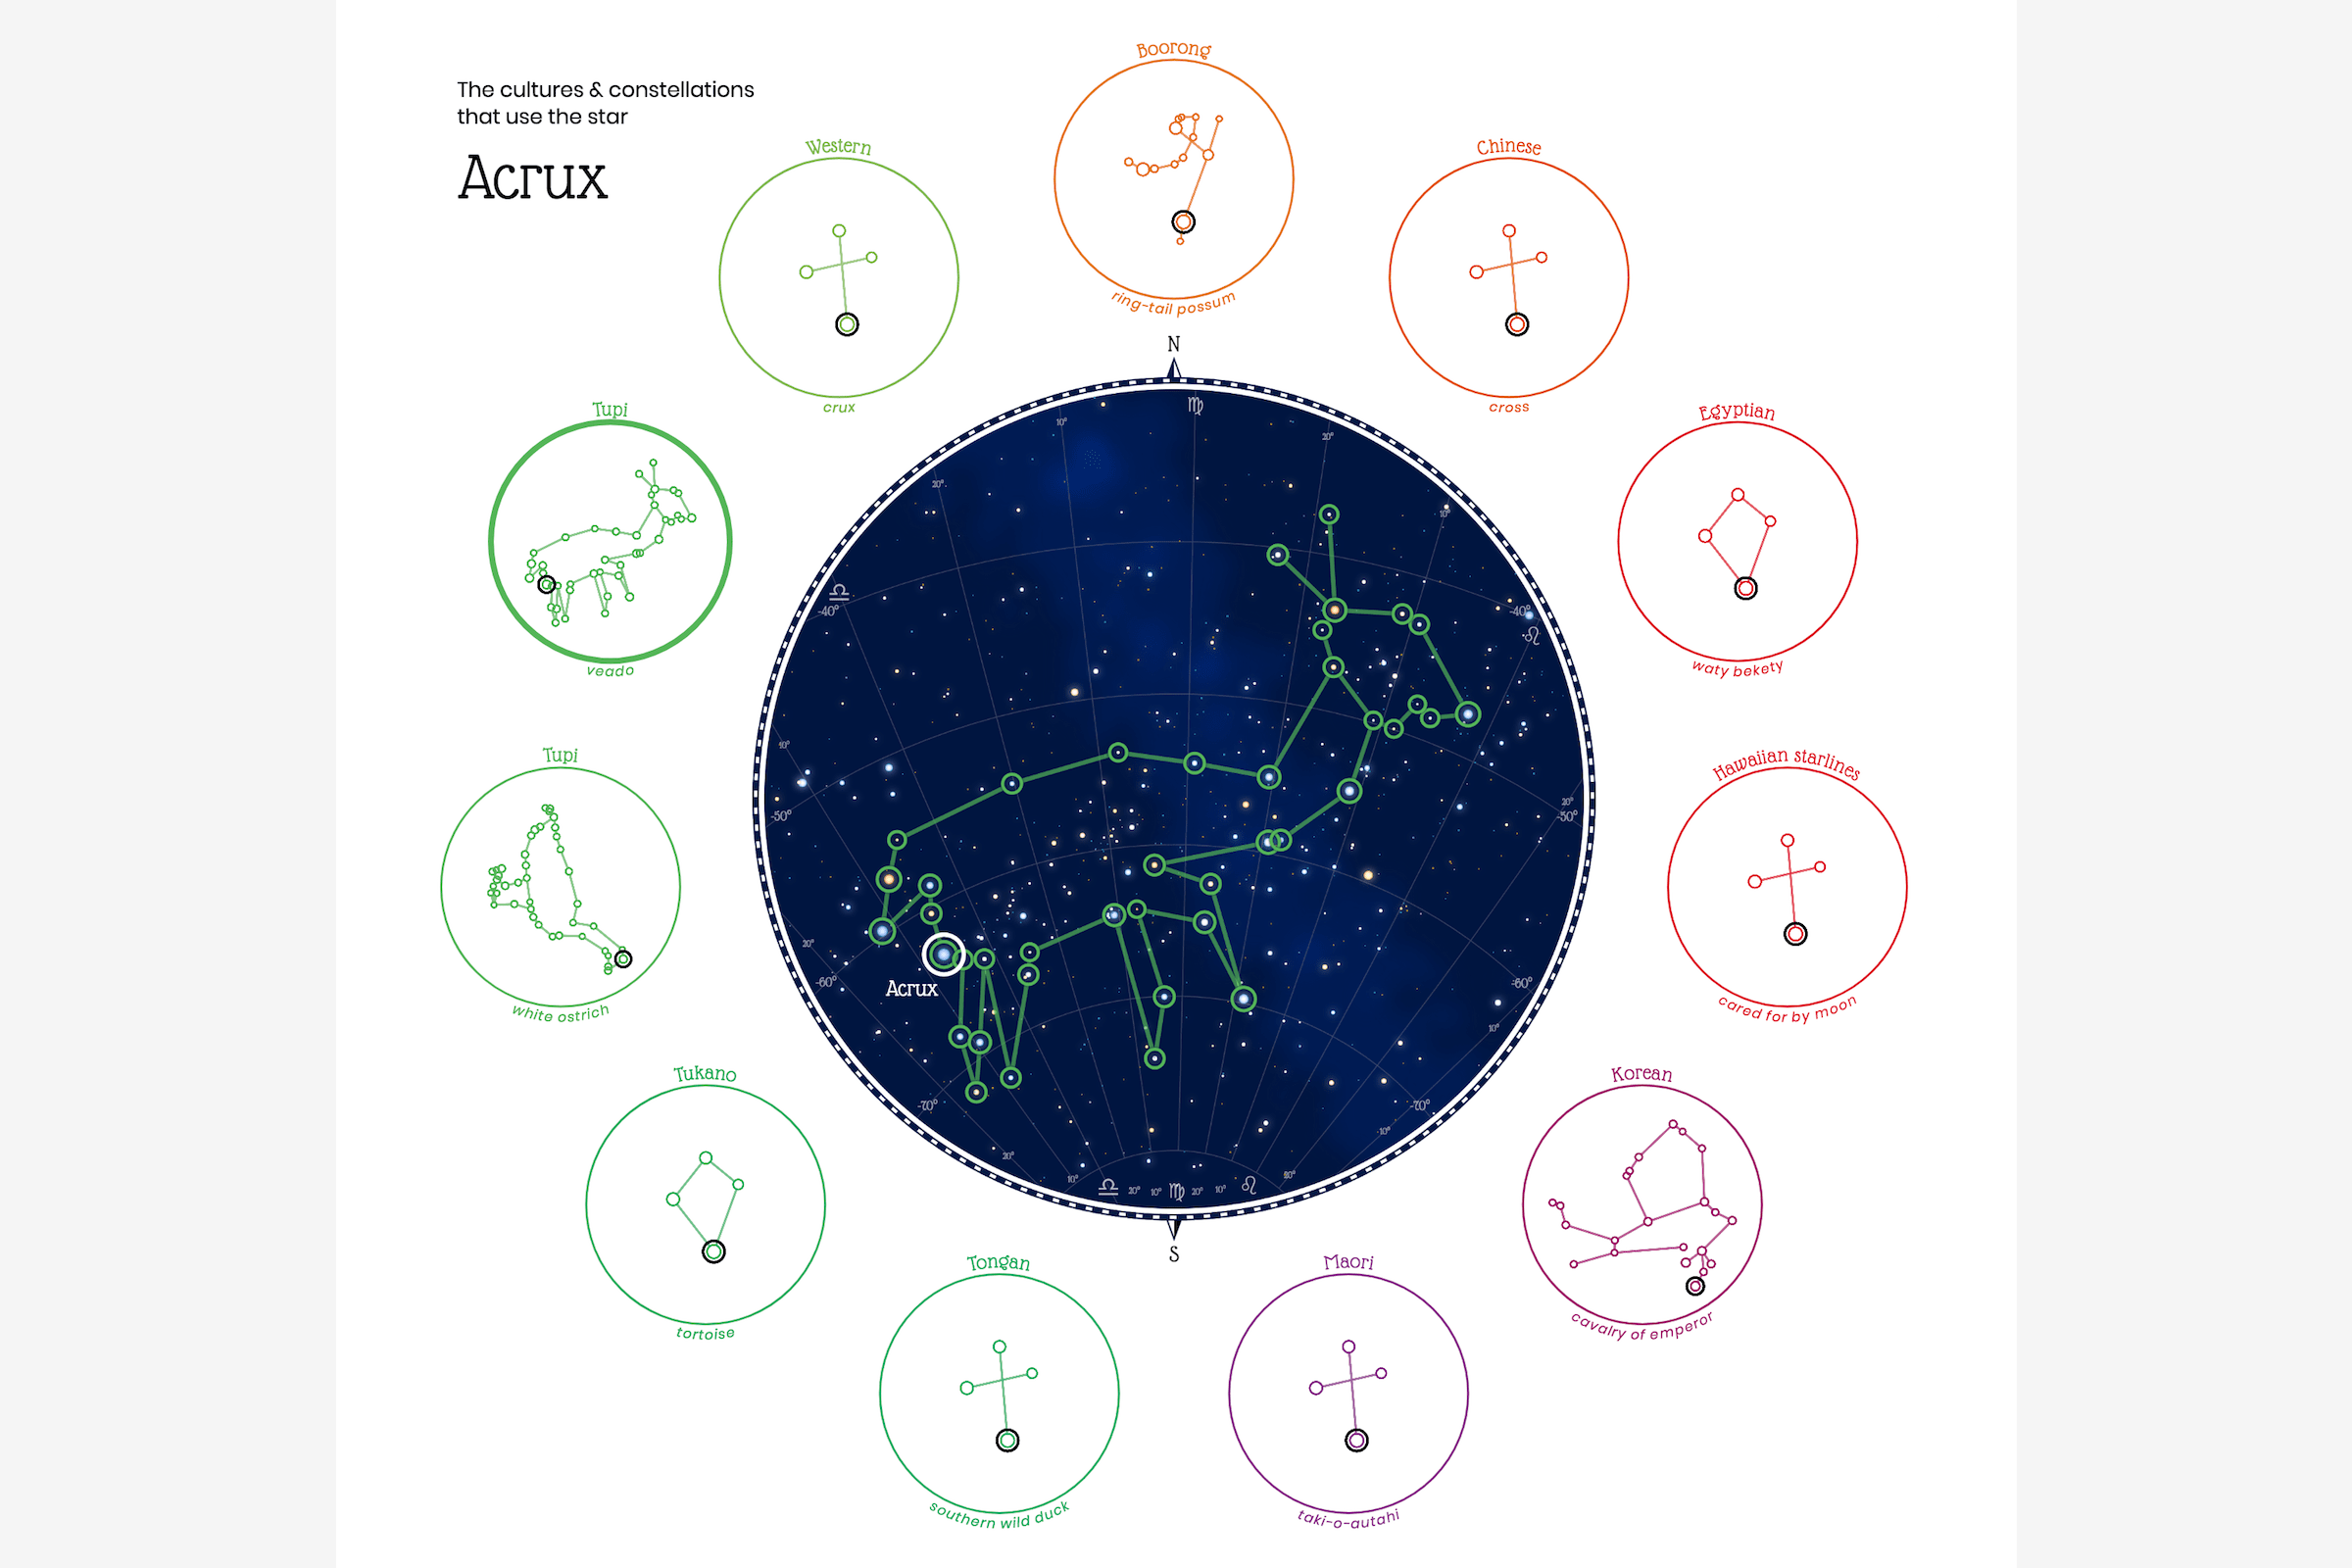 The circular sky map focusing on a Tupi constellation